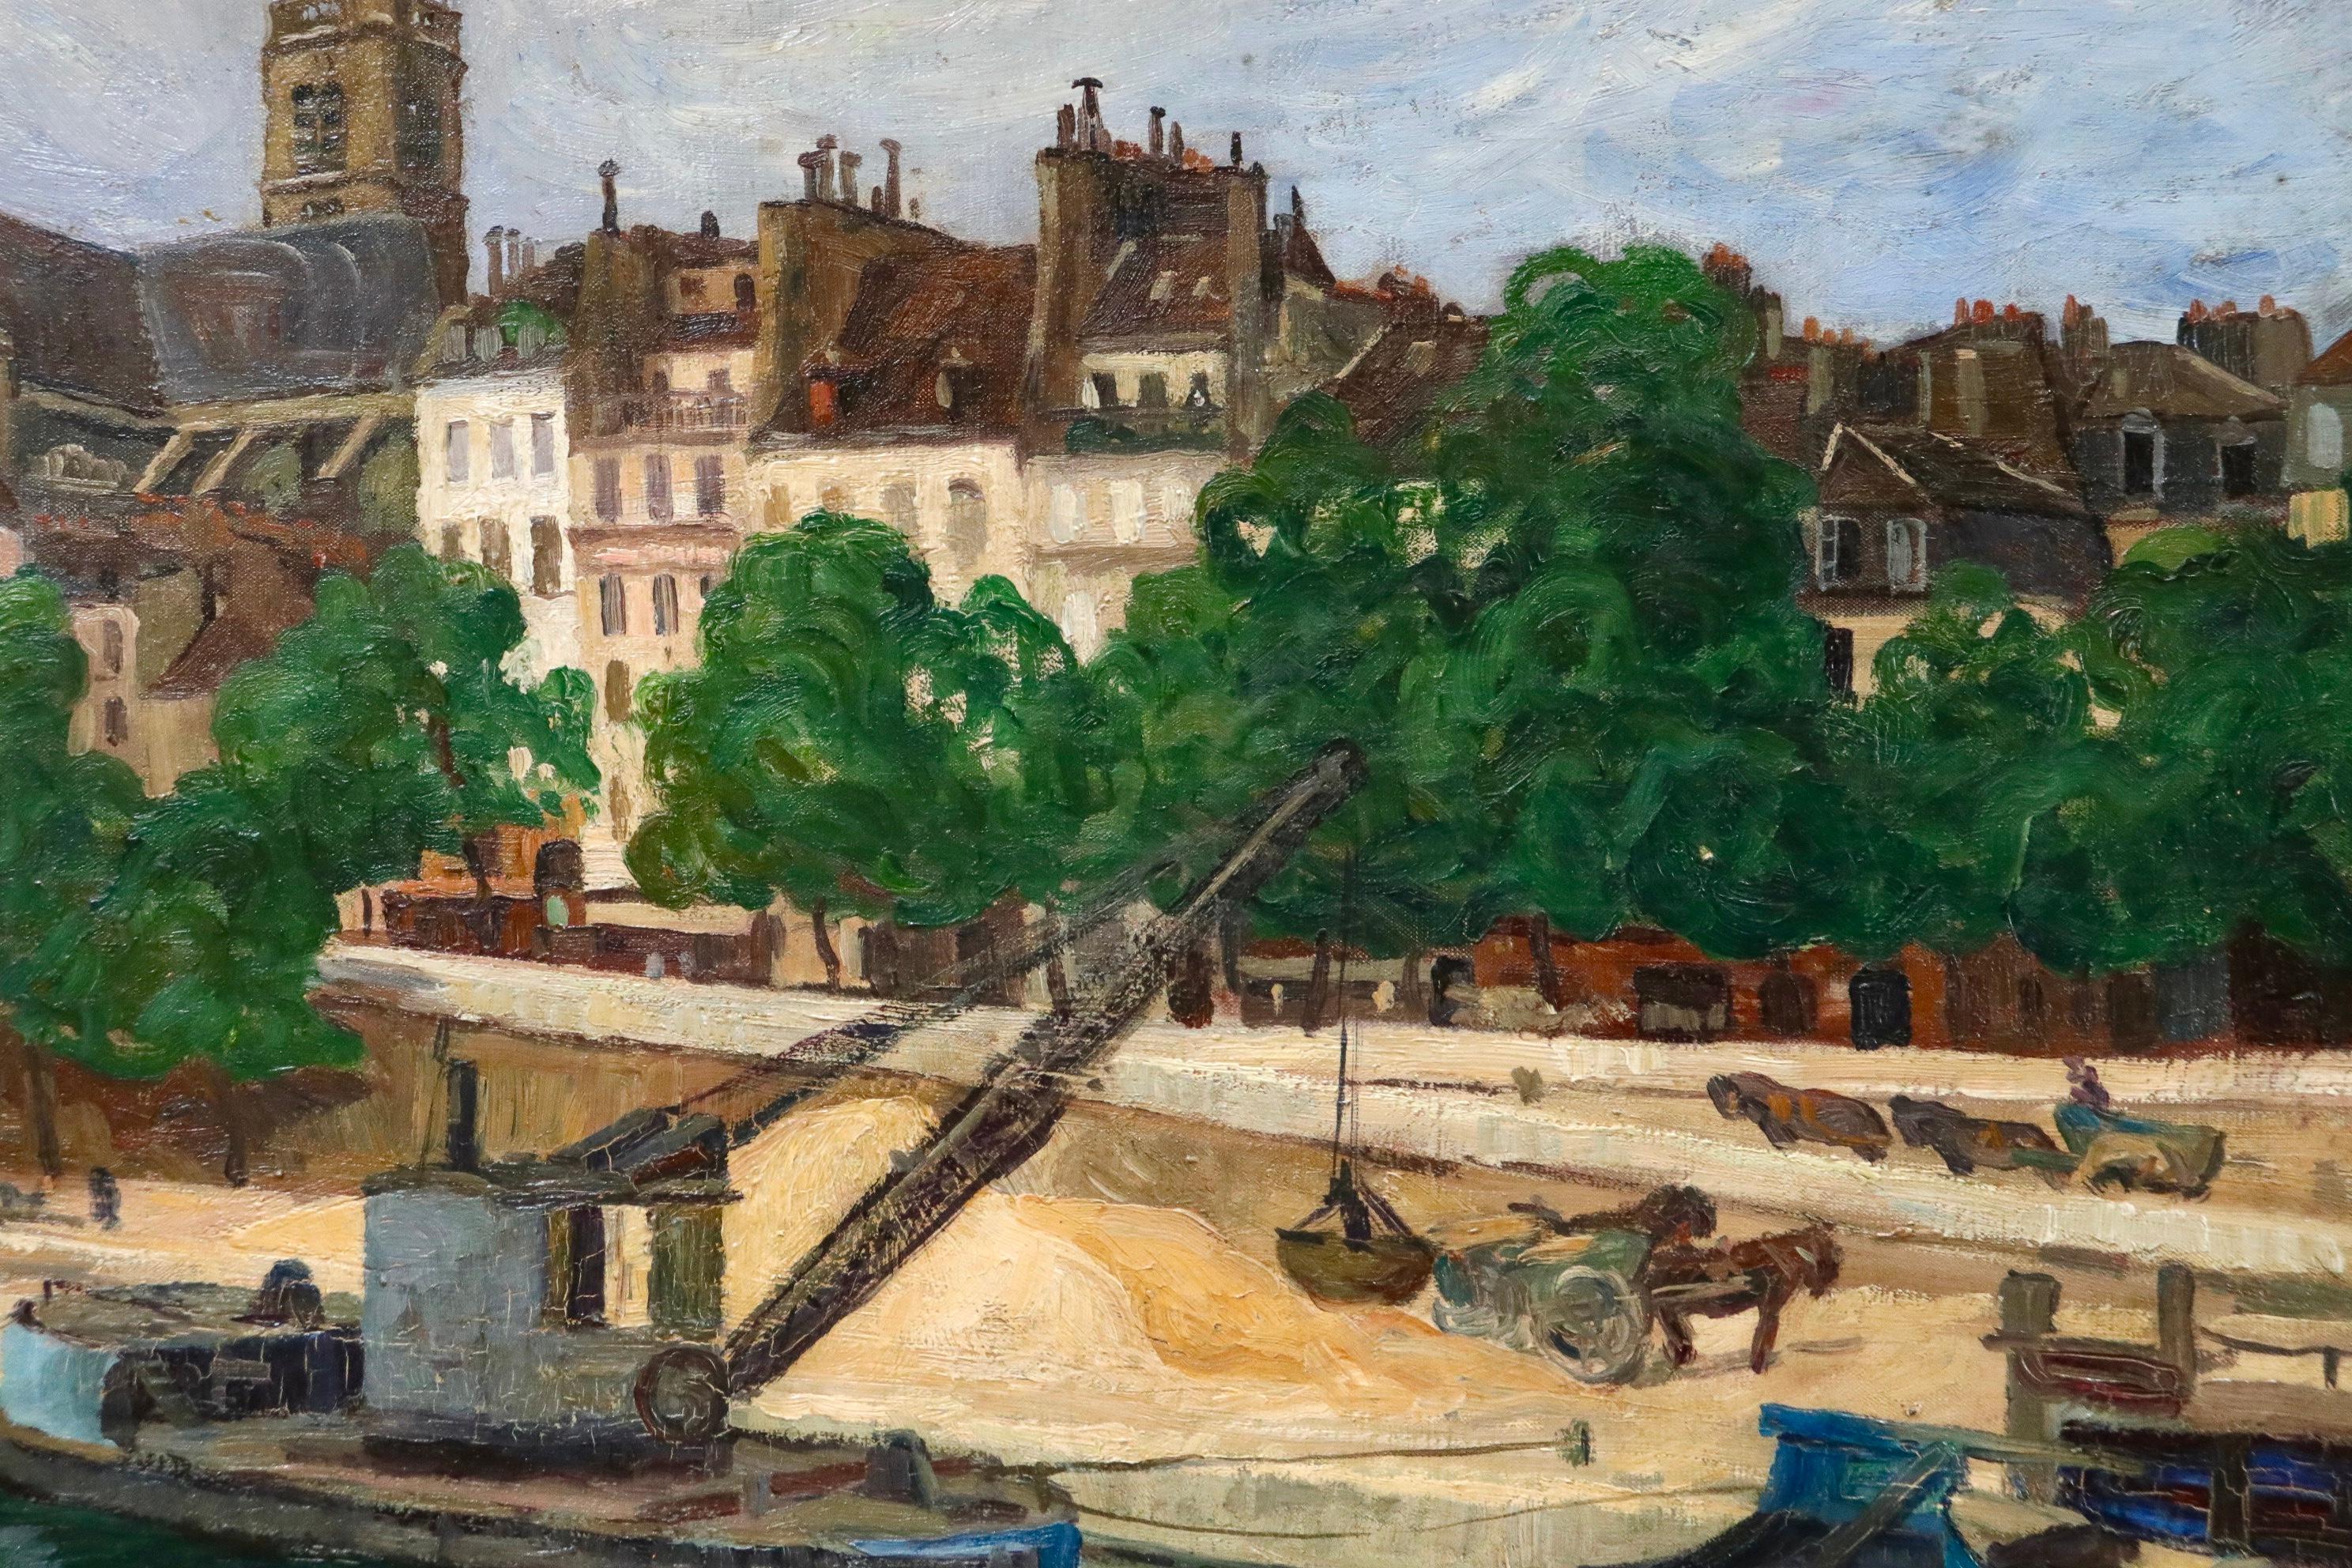 Workers on the Seine - Post Louis-Philippe - River Landscape Oil by G Balande - Impressionist Painting by Gaston Balande